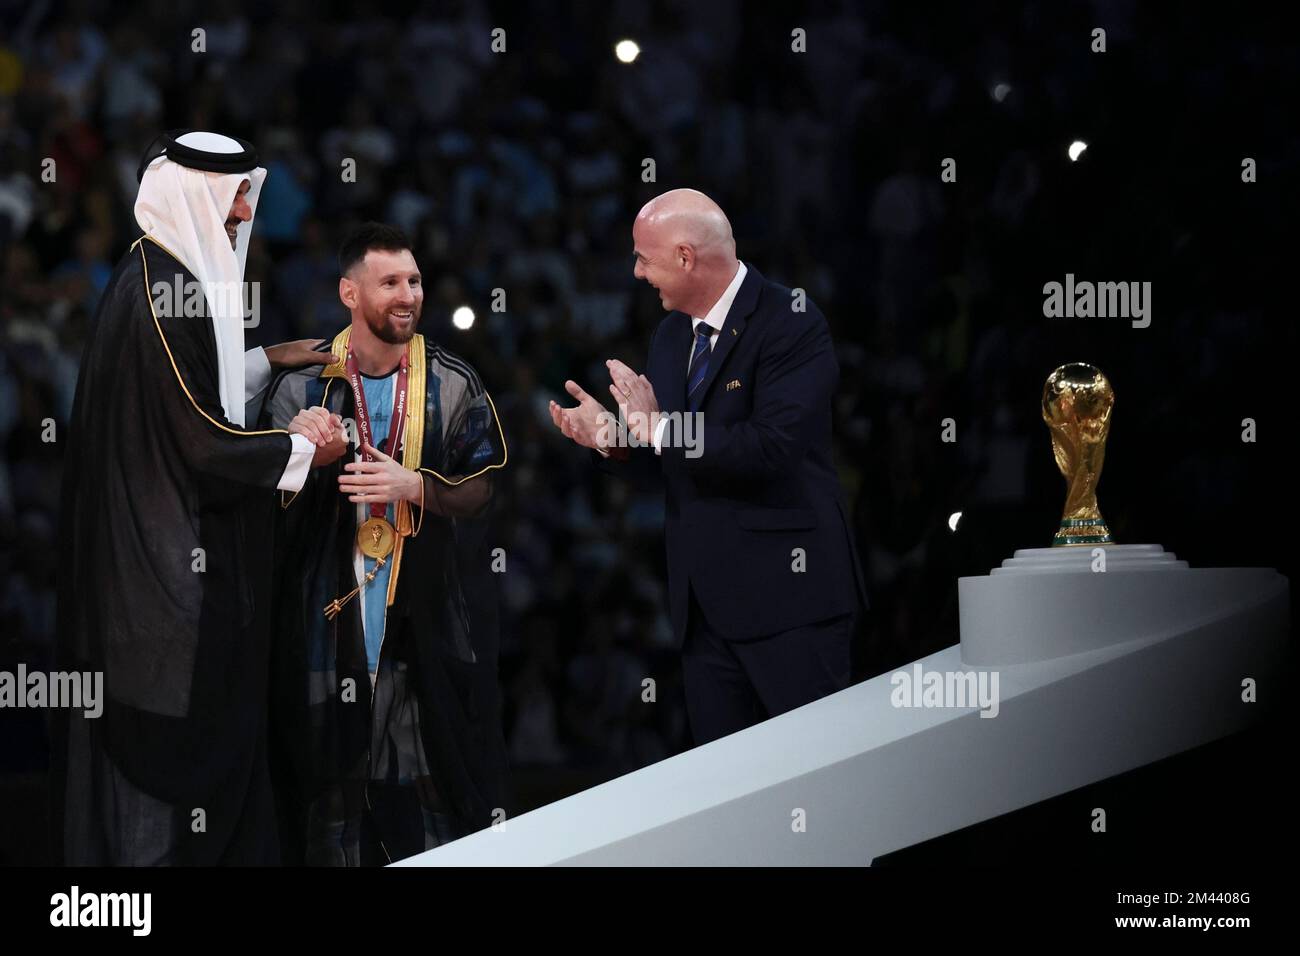 Lusail, Qatar. 18th Dec, 2022. FIFA President Gianni Infantino (R) and The Emir of Qatar Sheikh Tamim bin Hamad Al Thani (L) award Lionel Messi of Argentina during the awarding ceremony of the 2022 FIFA World Cup at Lusail Stadium in Lusail, Qatar, Dec. 18, 2022. Credit: Lan Hongguang/Xinhua/Alamy Live News/Alamy Live News Stock Photo